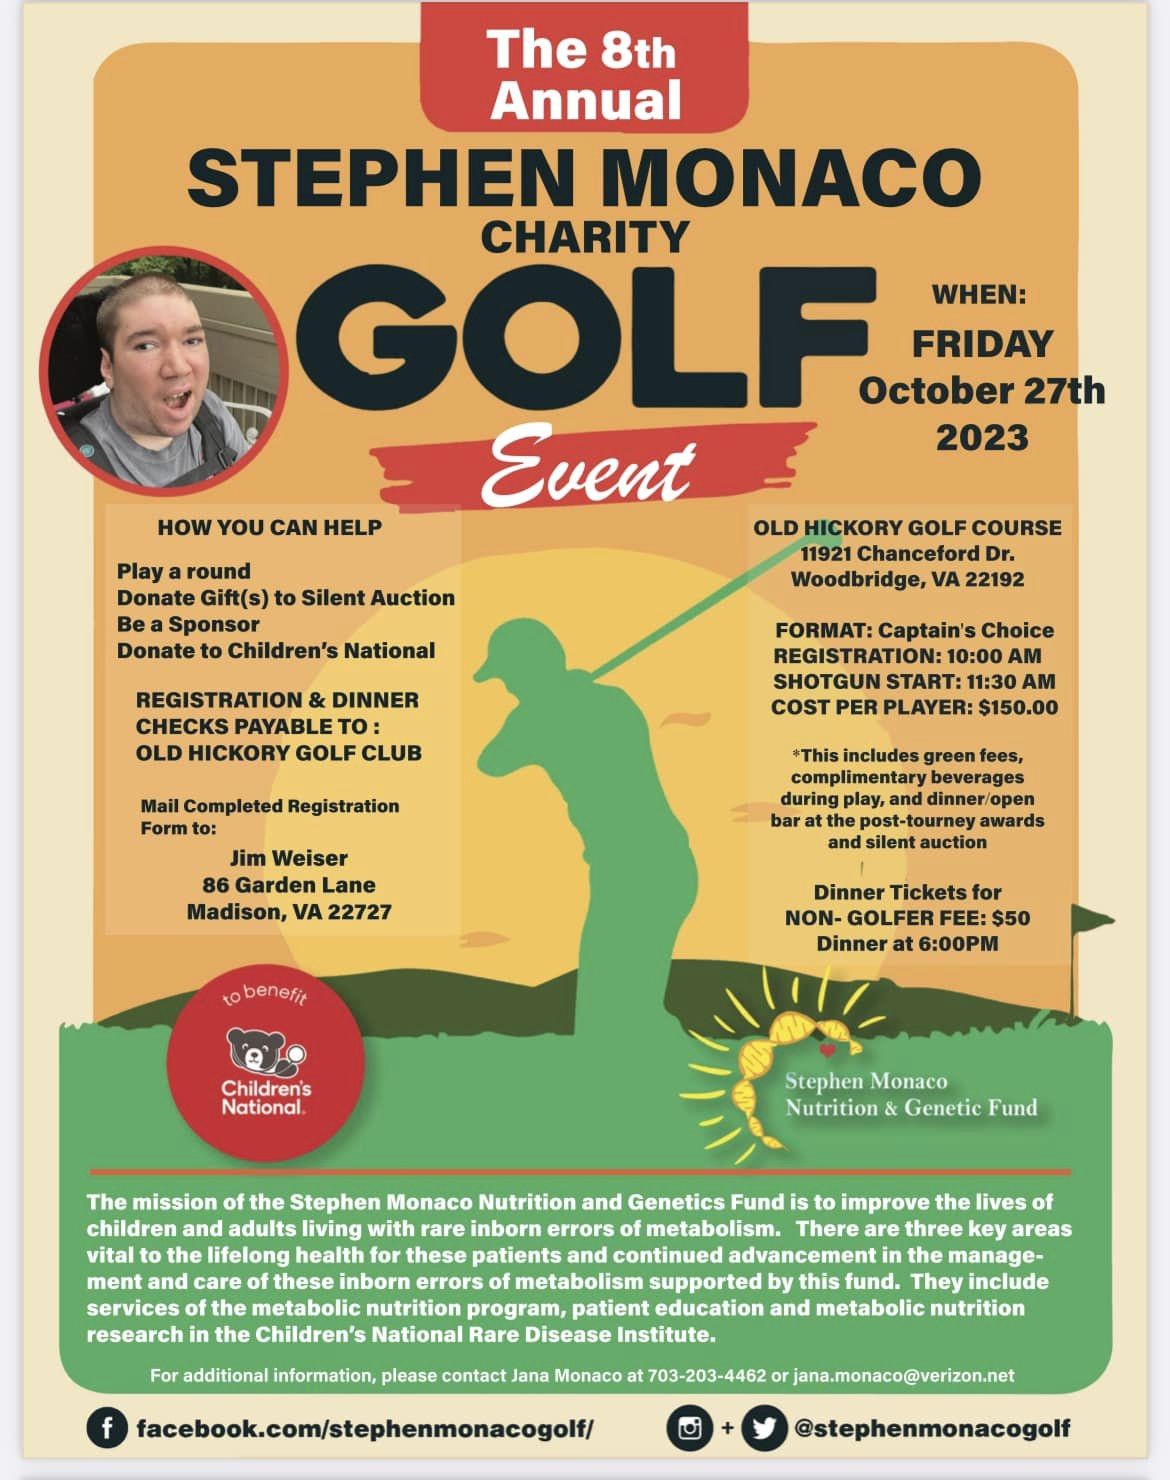 <h1 class="tribe-events-single-event-title">Stephen Monaco Charity Golf Event</h1>